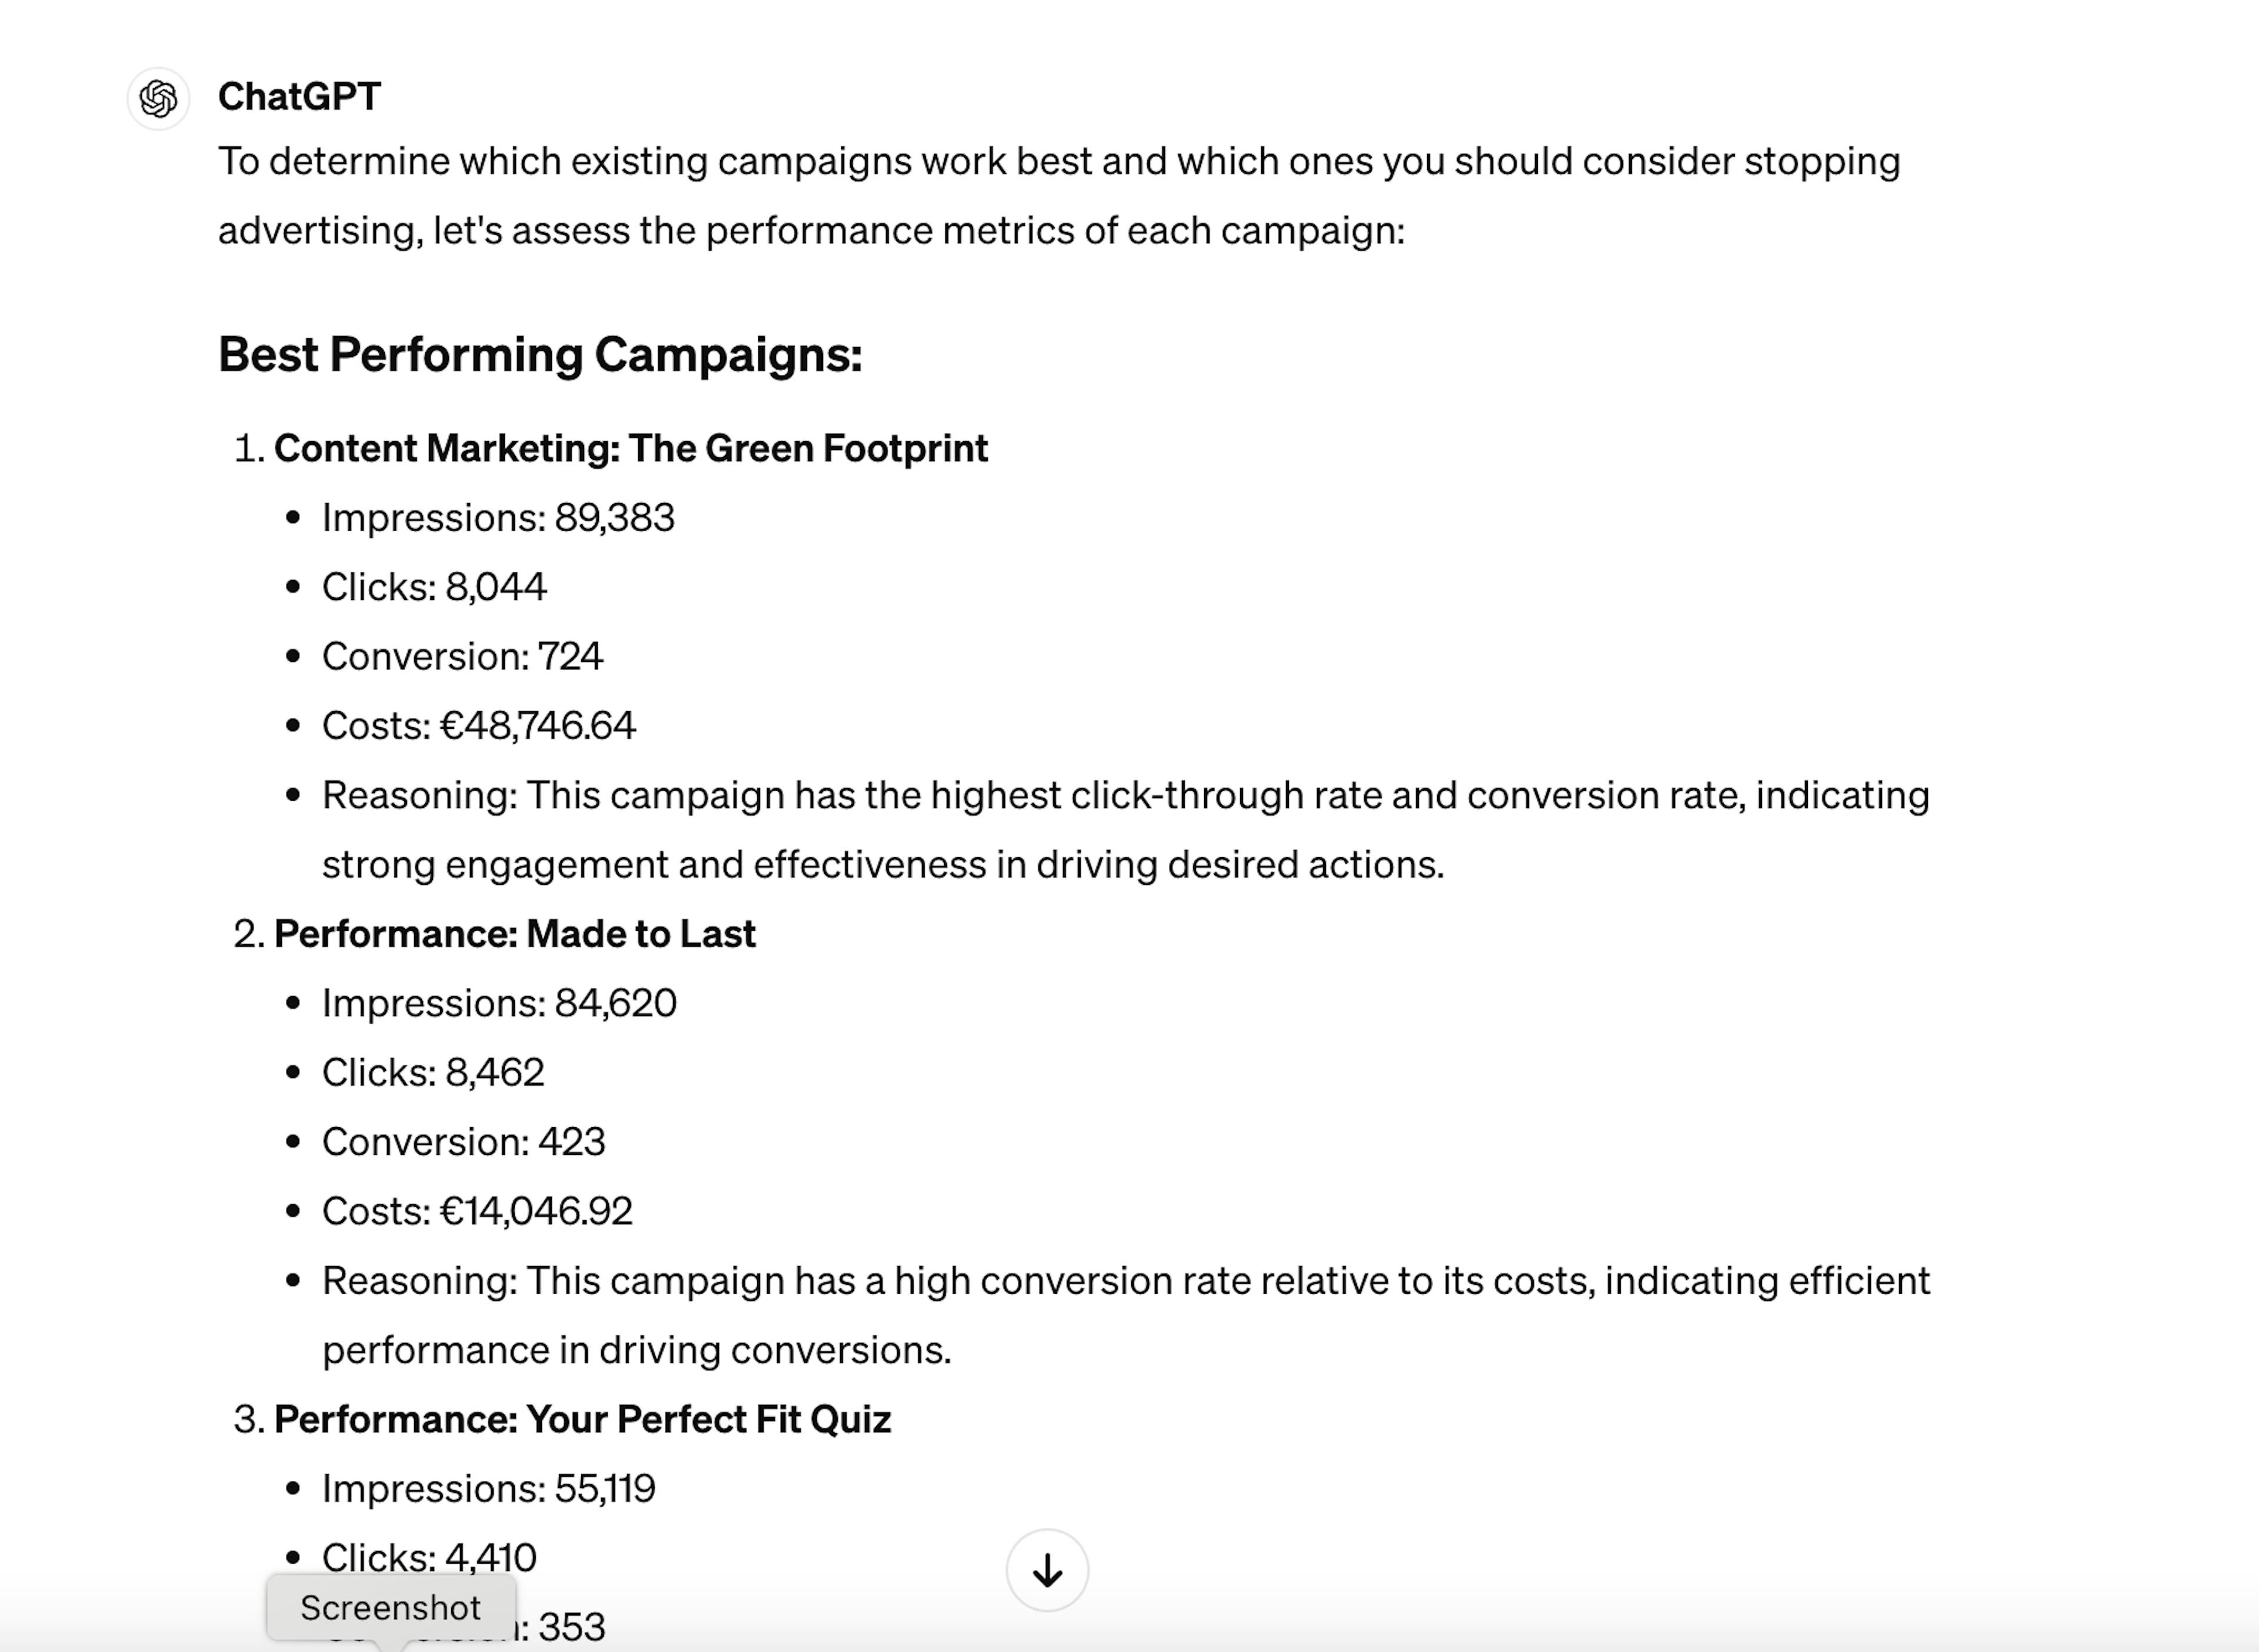 I employed ChatGPT to analyze my campaign performance and provide optimization recommendations.